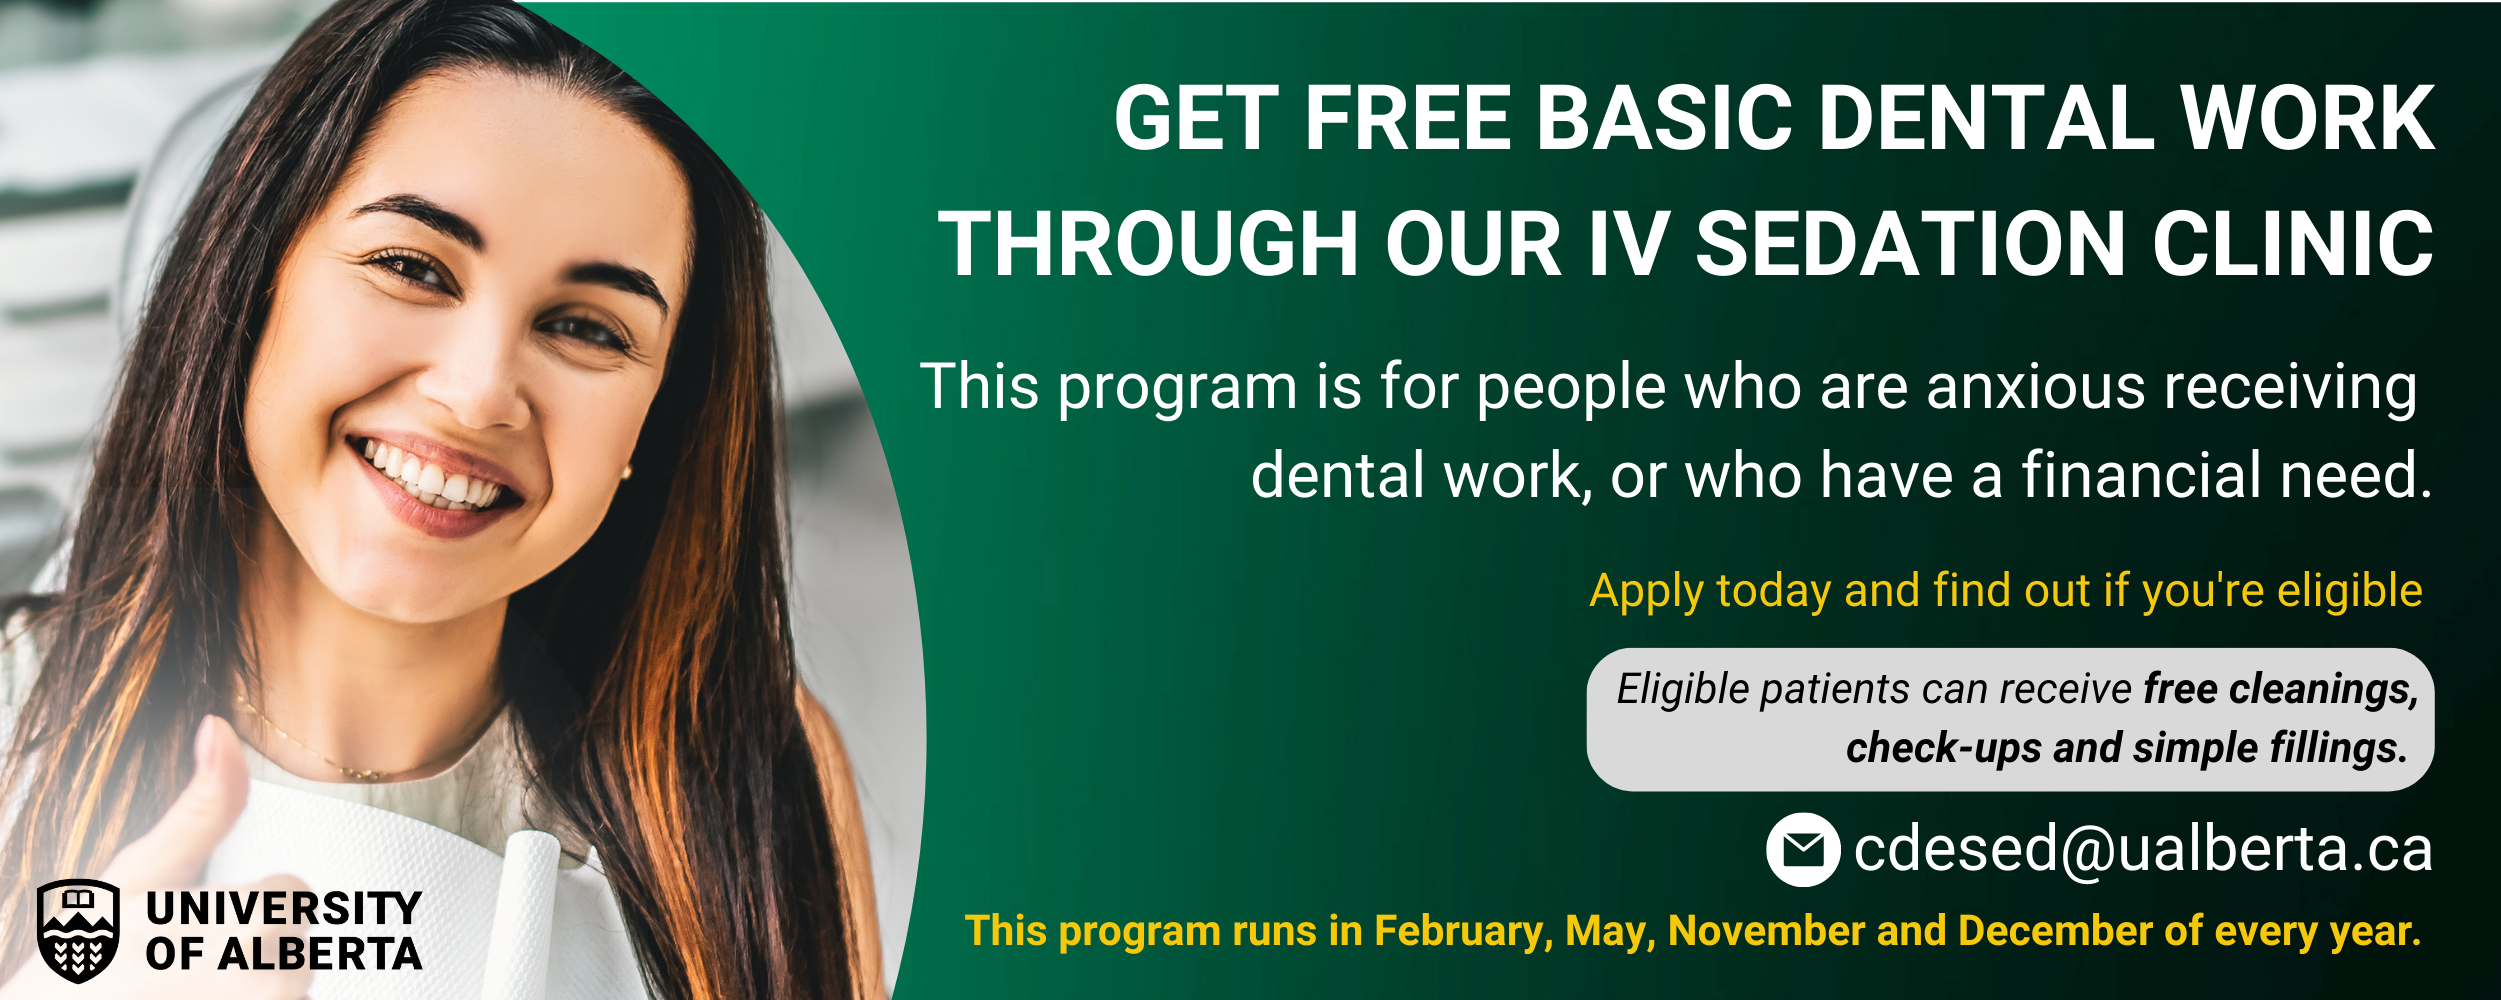 Reach out to cdesed@uablerta.ca to find out if you're eligible for free dental work.